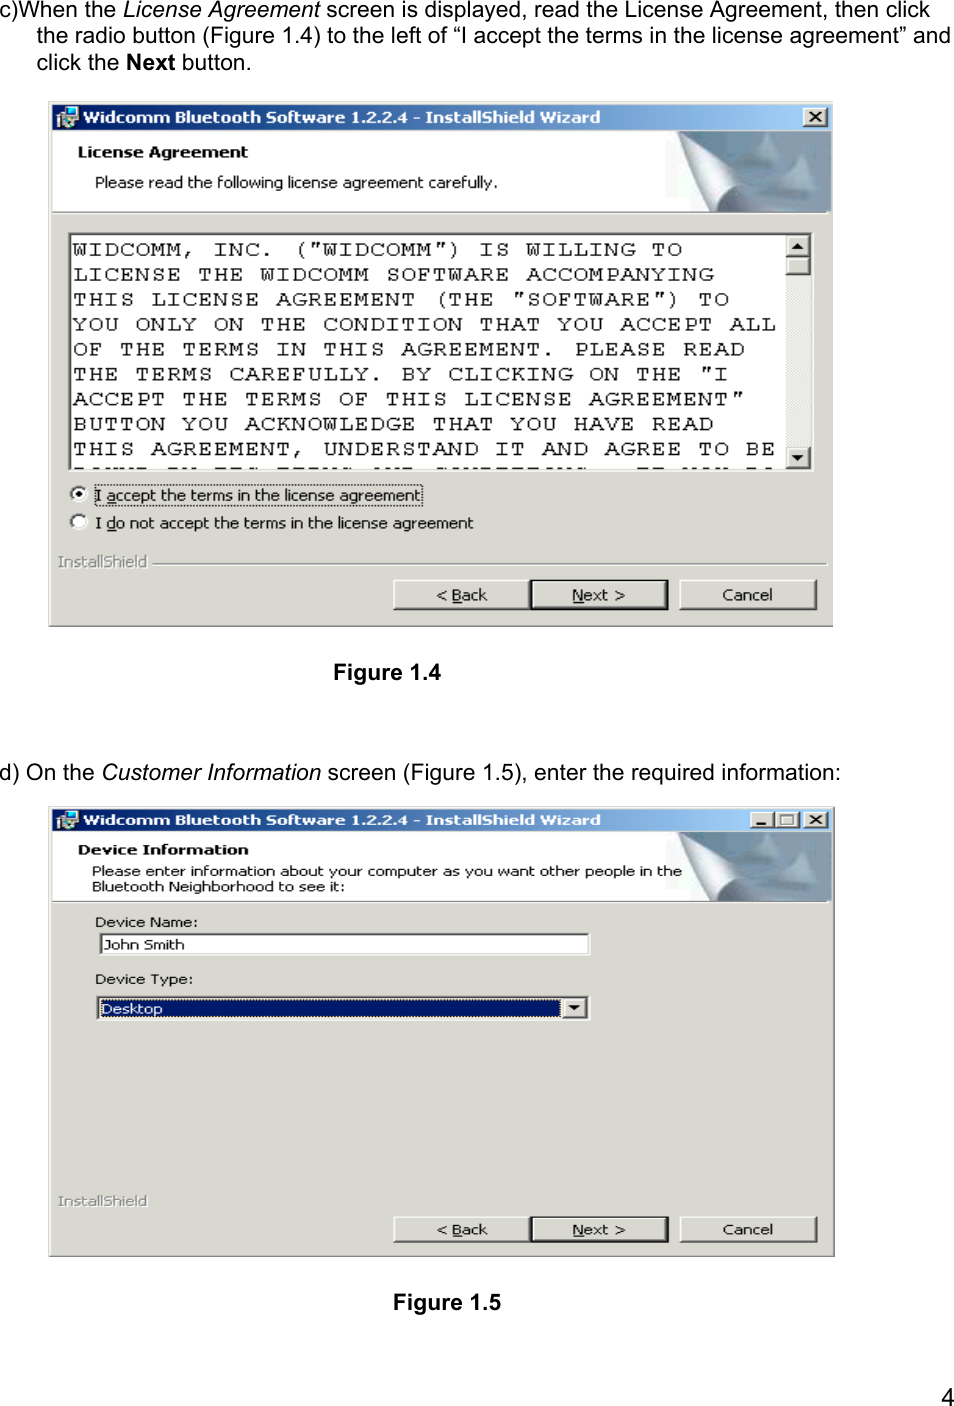 4c)When the License Agreement screen is displayed, read the License Agreement, then clickthe radio button (Figure 1.4) to the left of “I accept the terms in the license agreement” andclick the Next button.d) On the Customer Information screen (Figure 1.5), enter the required information:Figure 1.4Figure 1.5